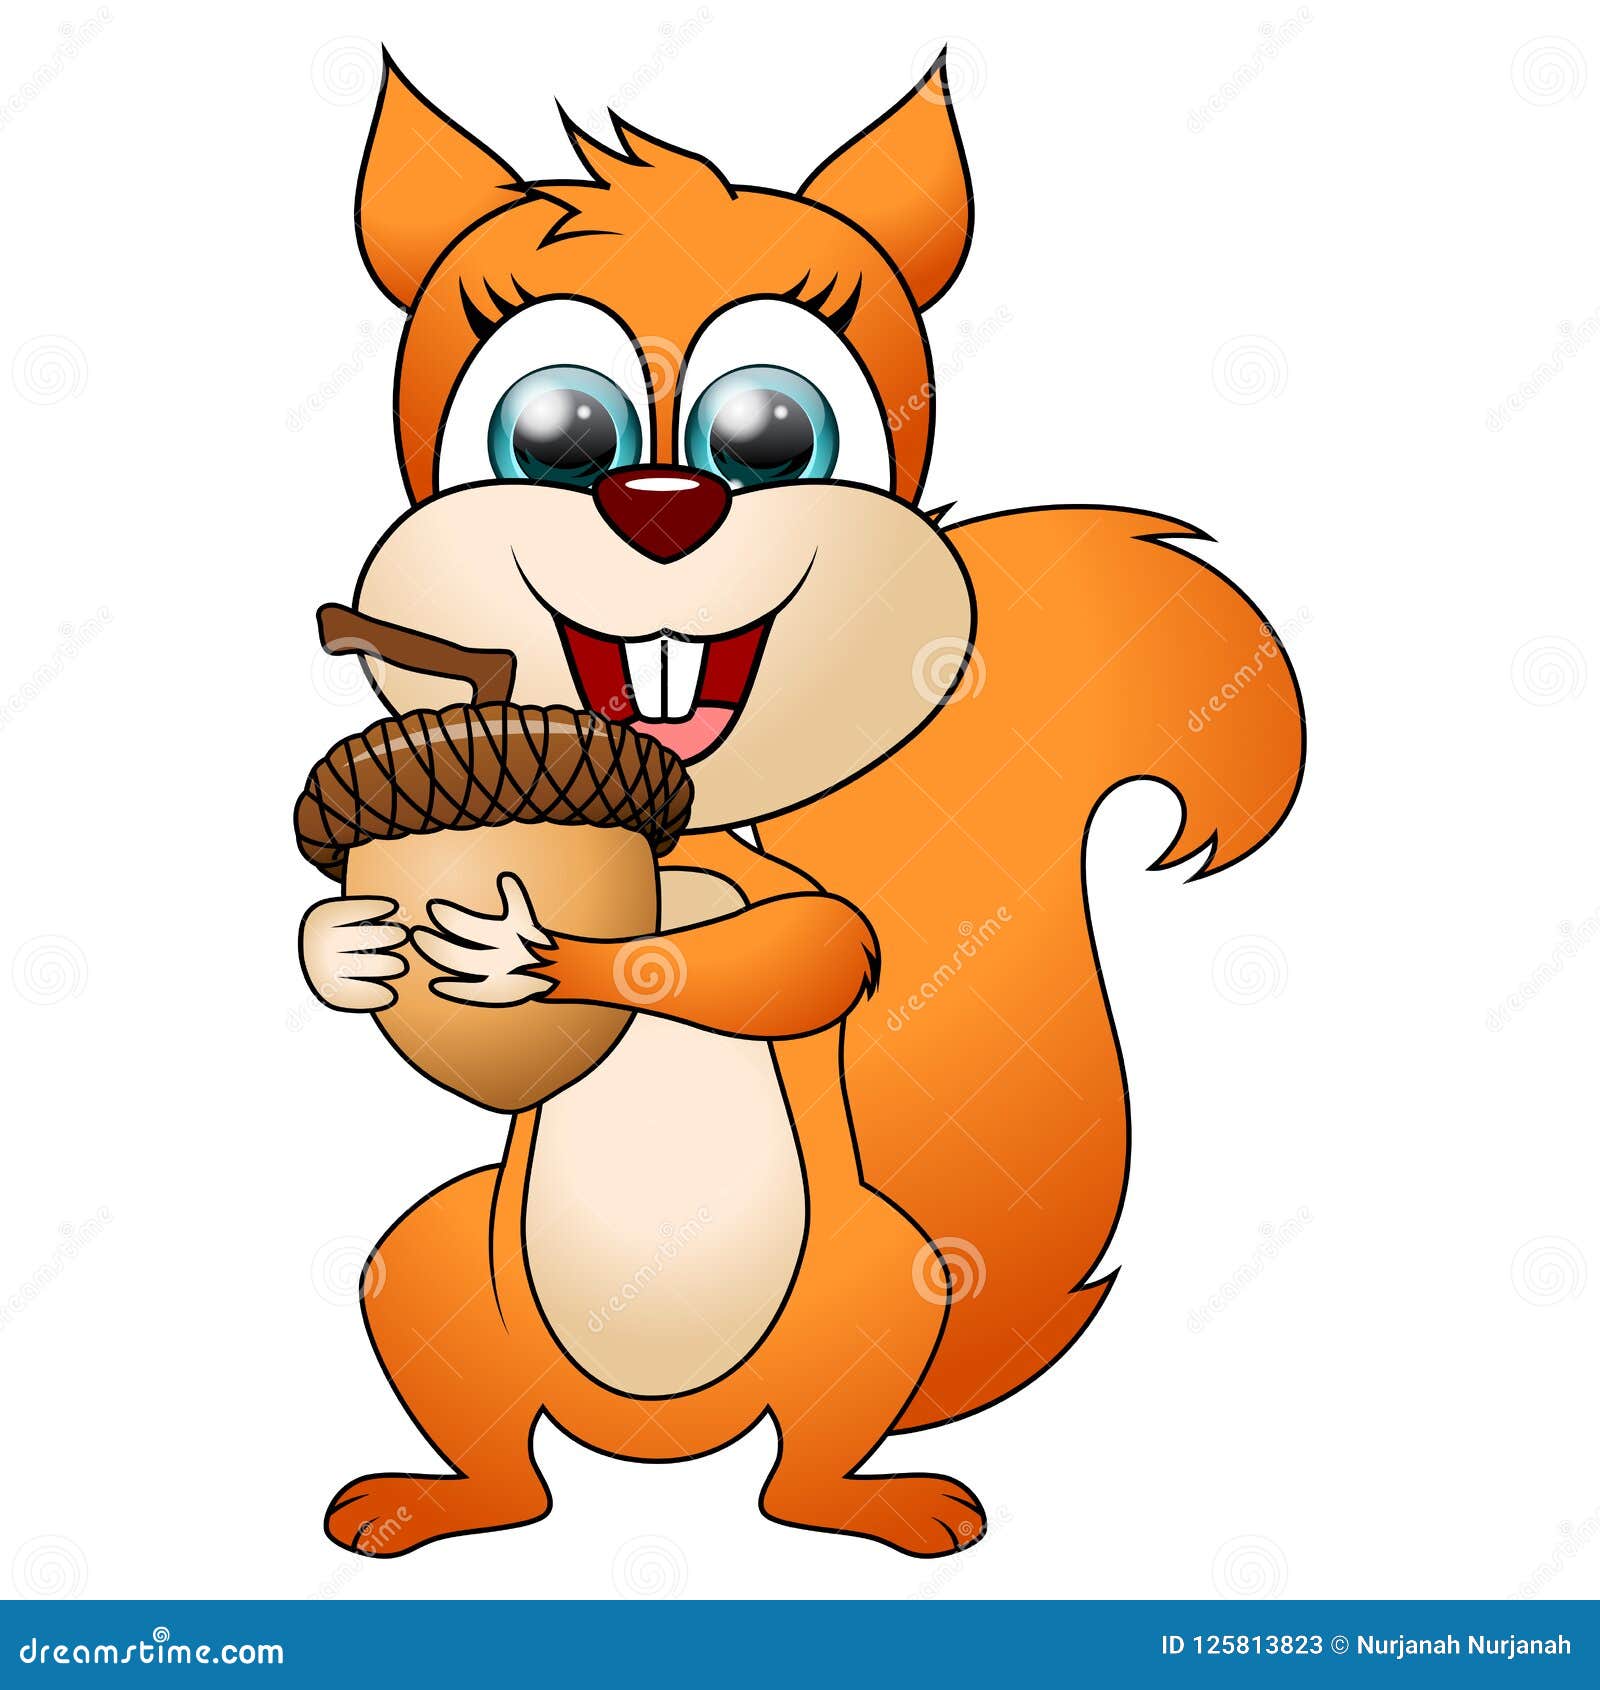 Cartoon Funny Squirrel Isolated on White Background Stock Vector ...